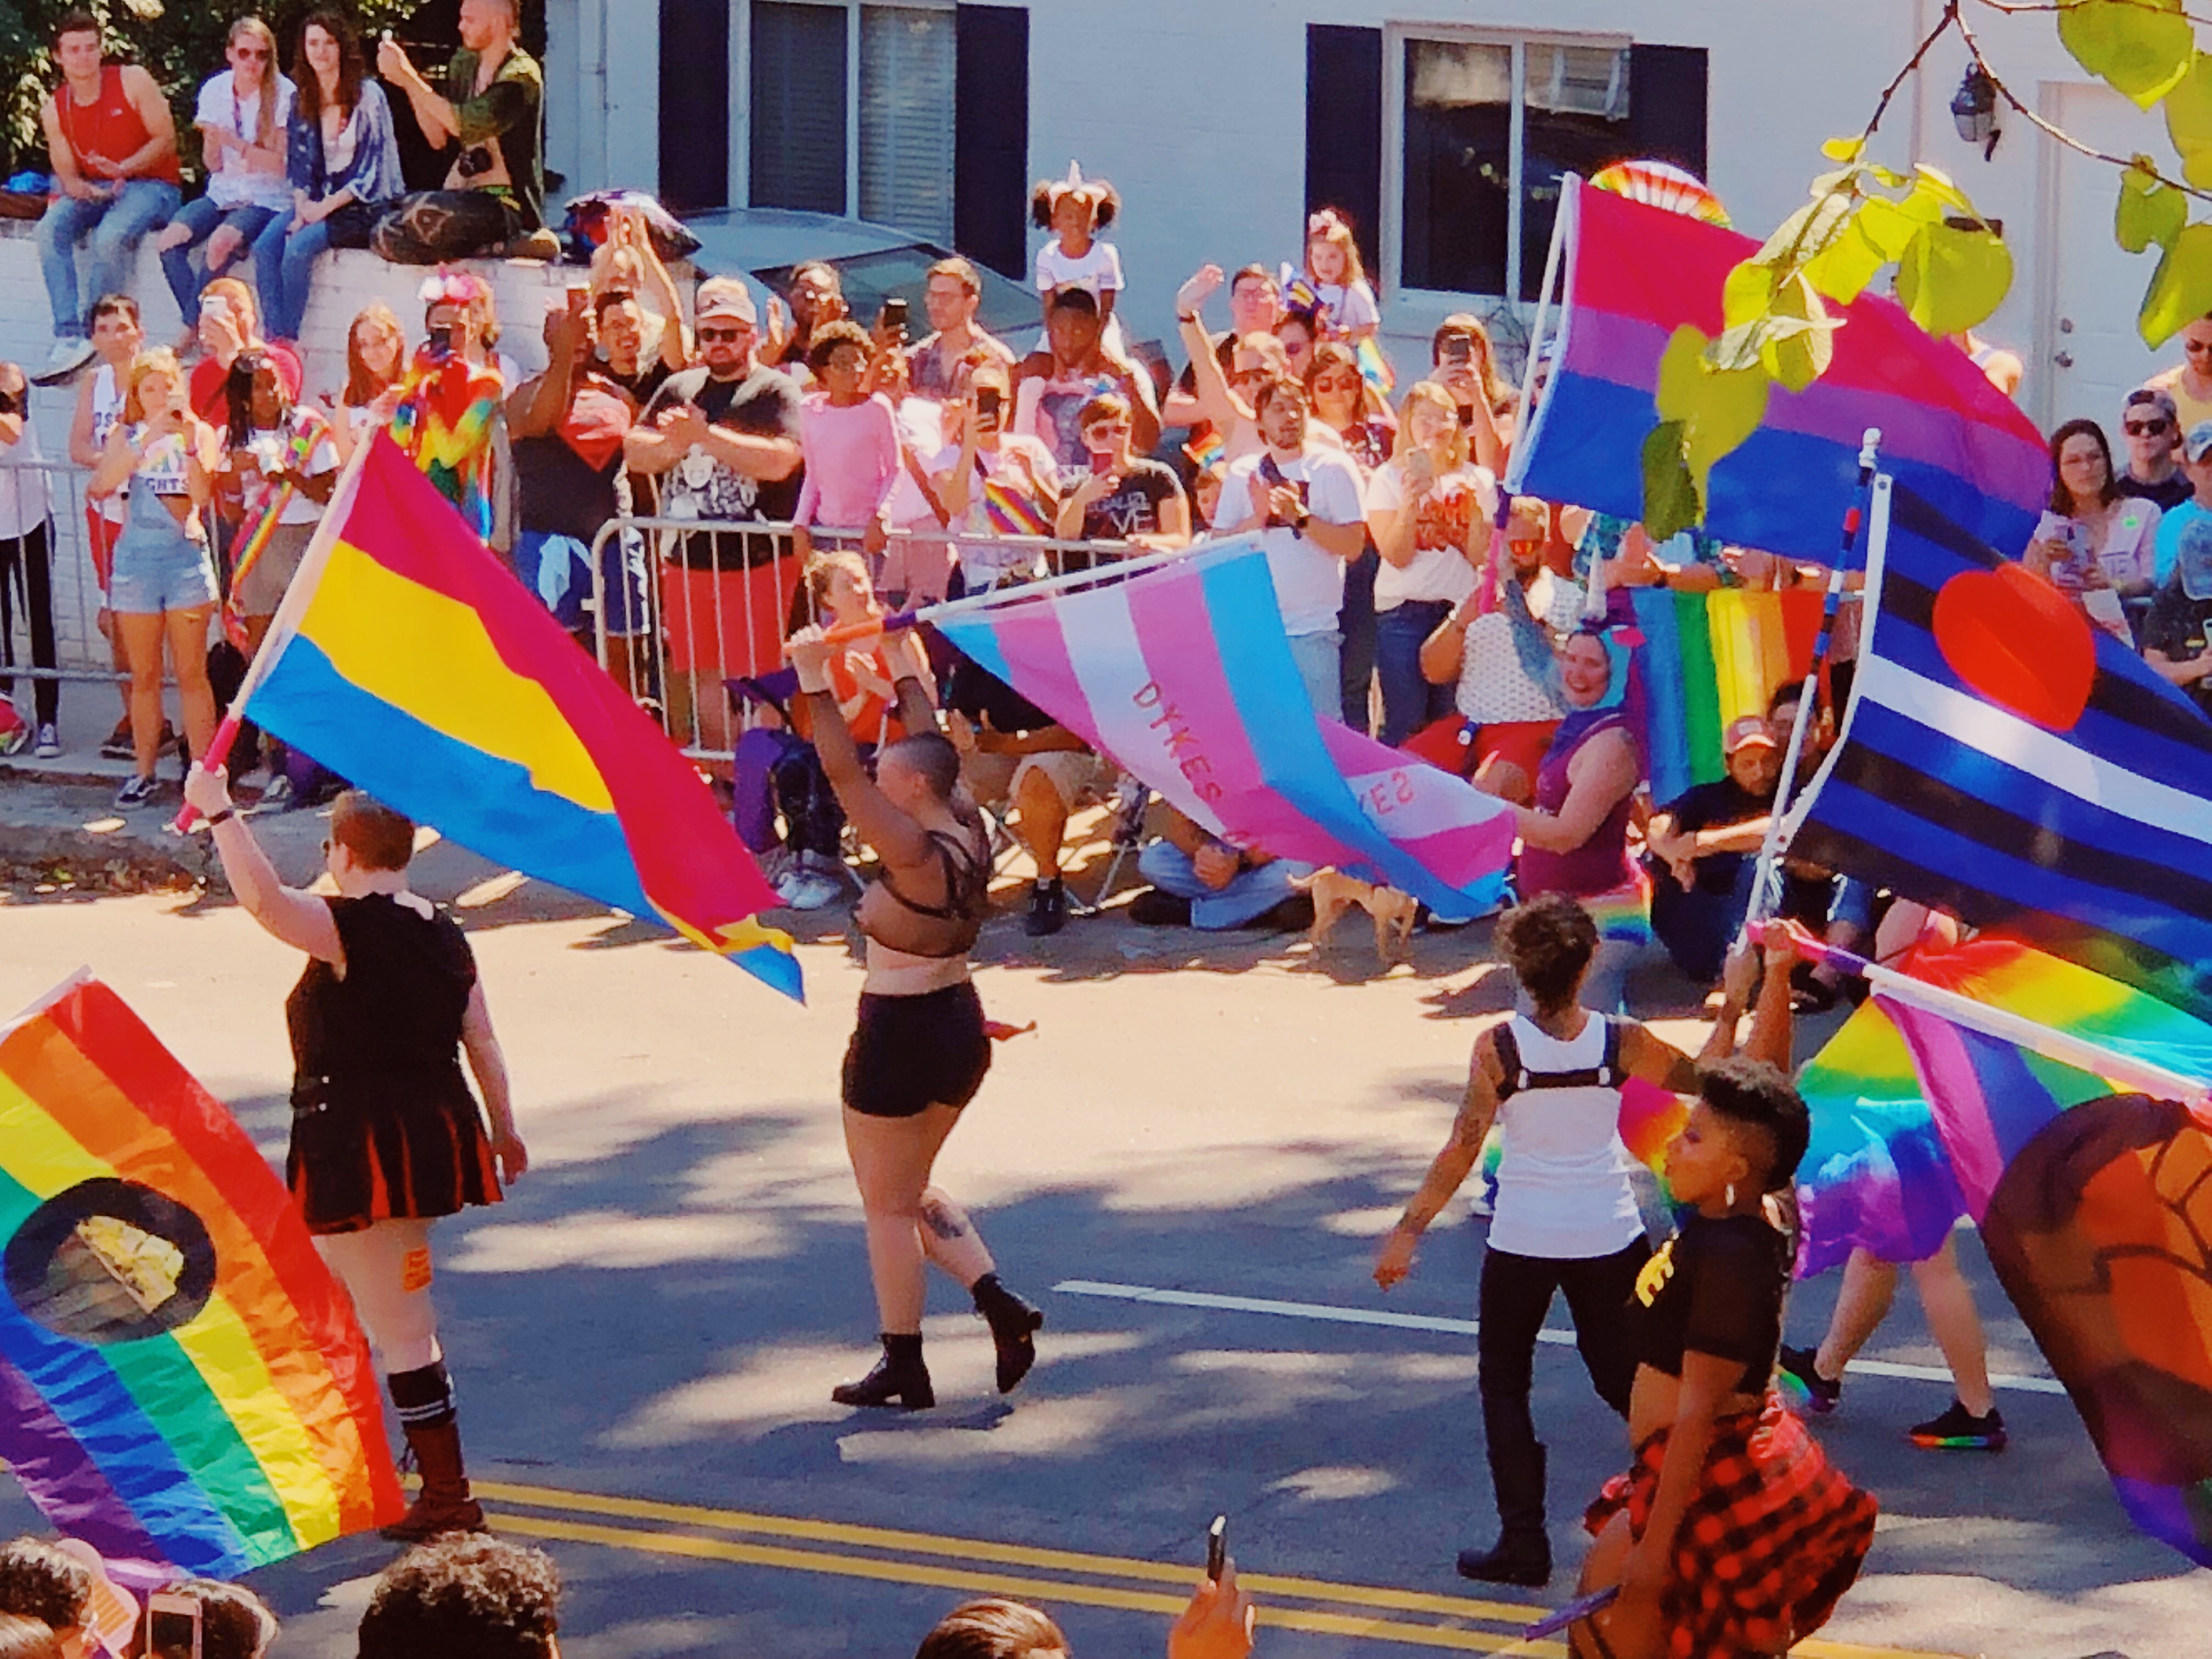 Check out what you missed at Atlanta Pride Festival 2018 The Connector